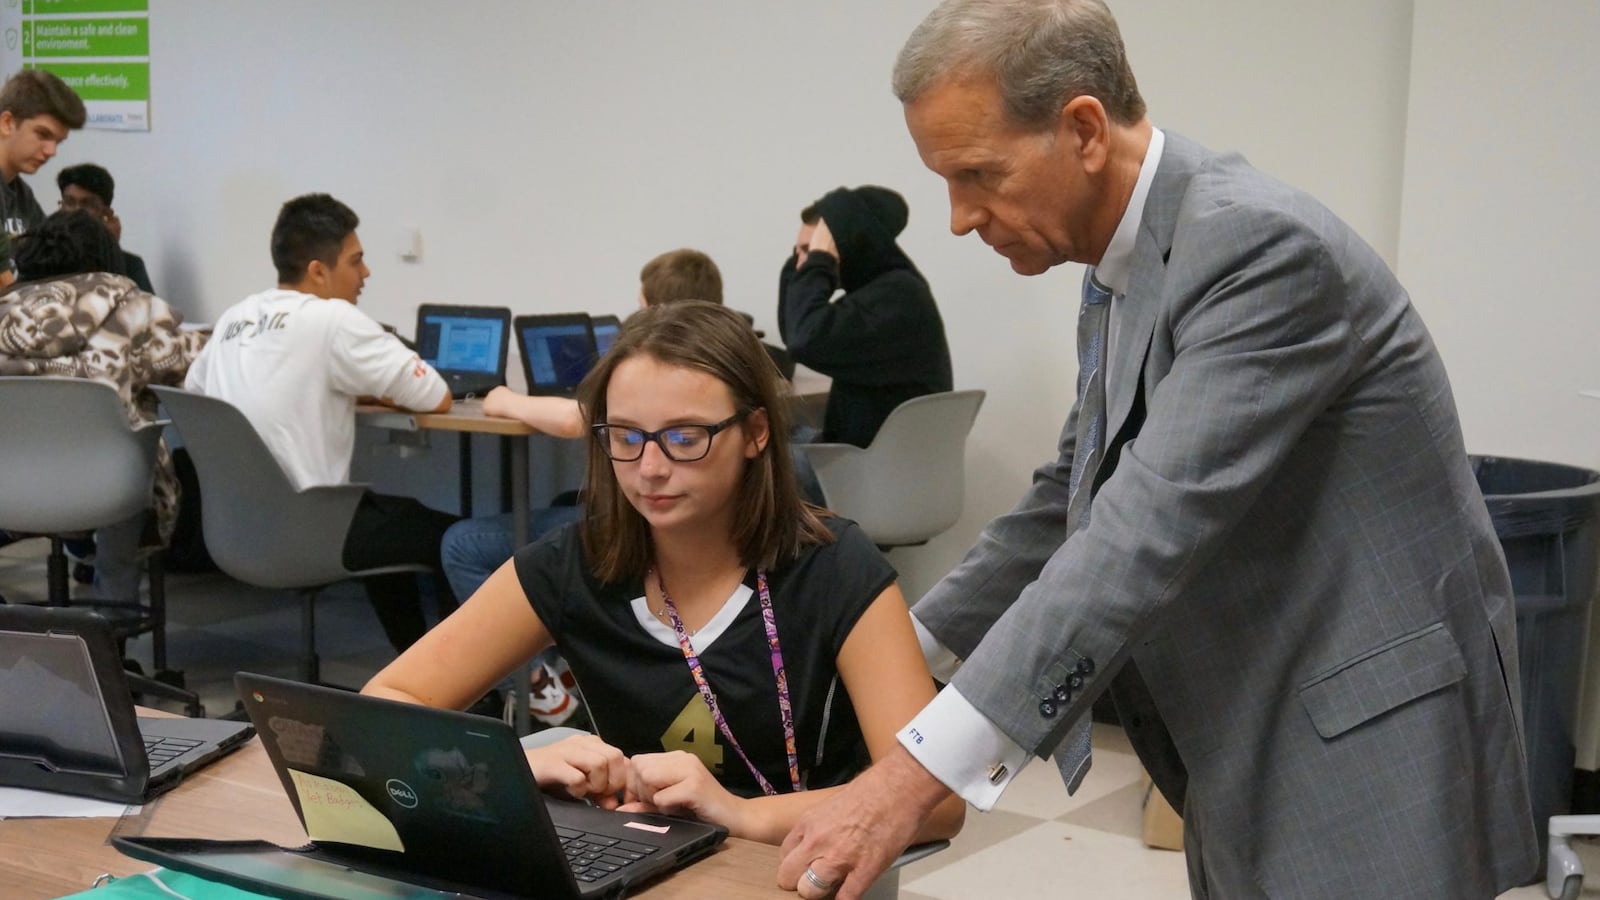 U.S. Department of Education official Frank Brogan visited Purdue Polytechnic High School Wednesday.